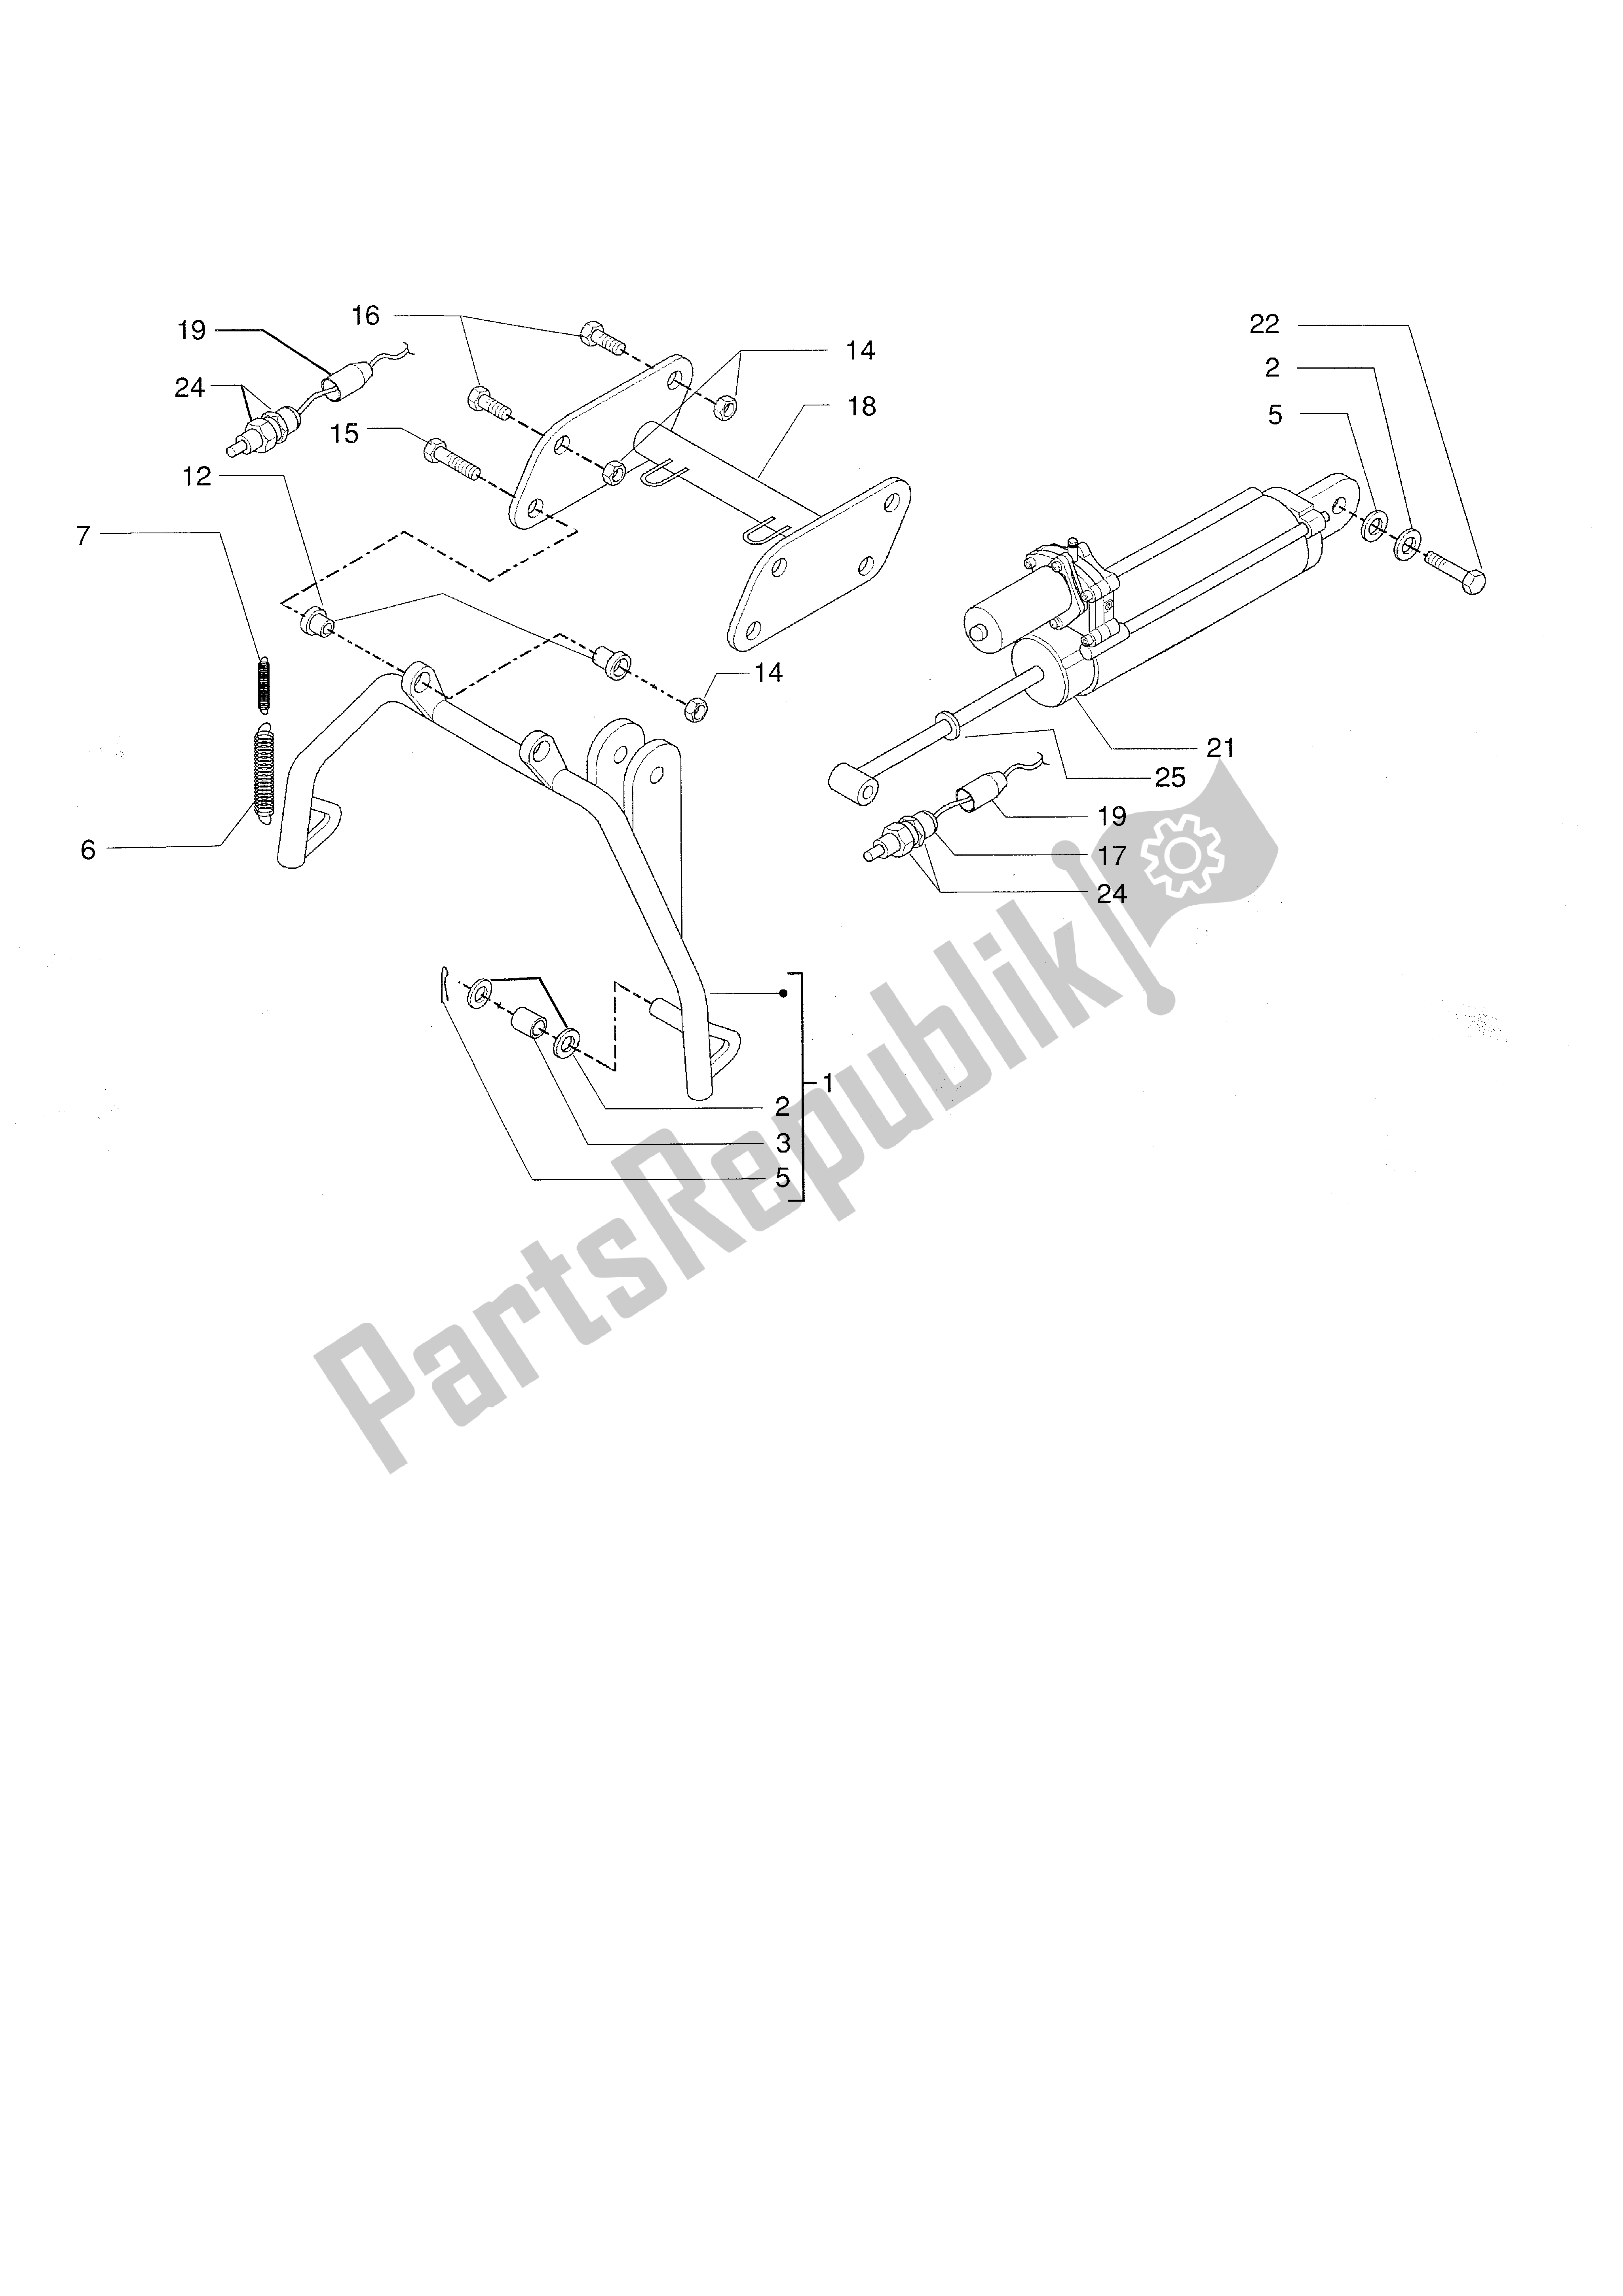 All parts for the Electrohydraulic Central Stand ... Of the Piaggio X9 500 2001 - 2002